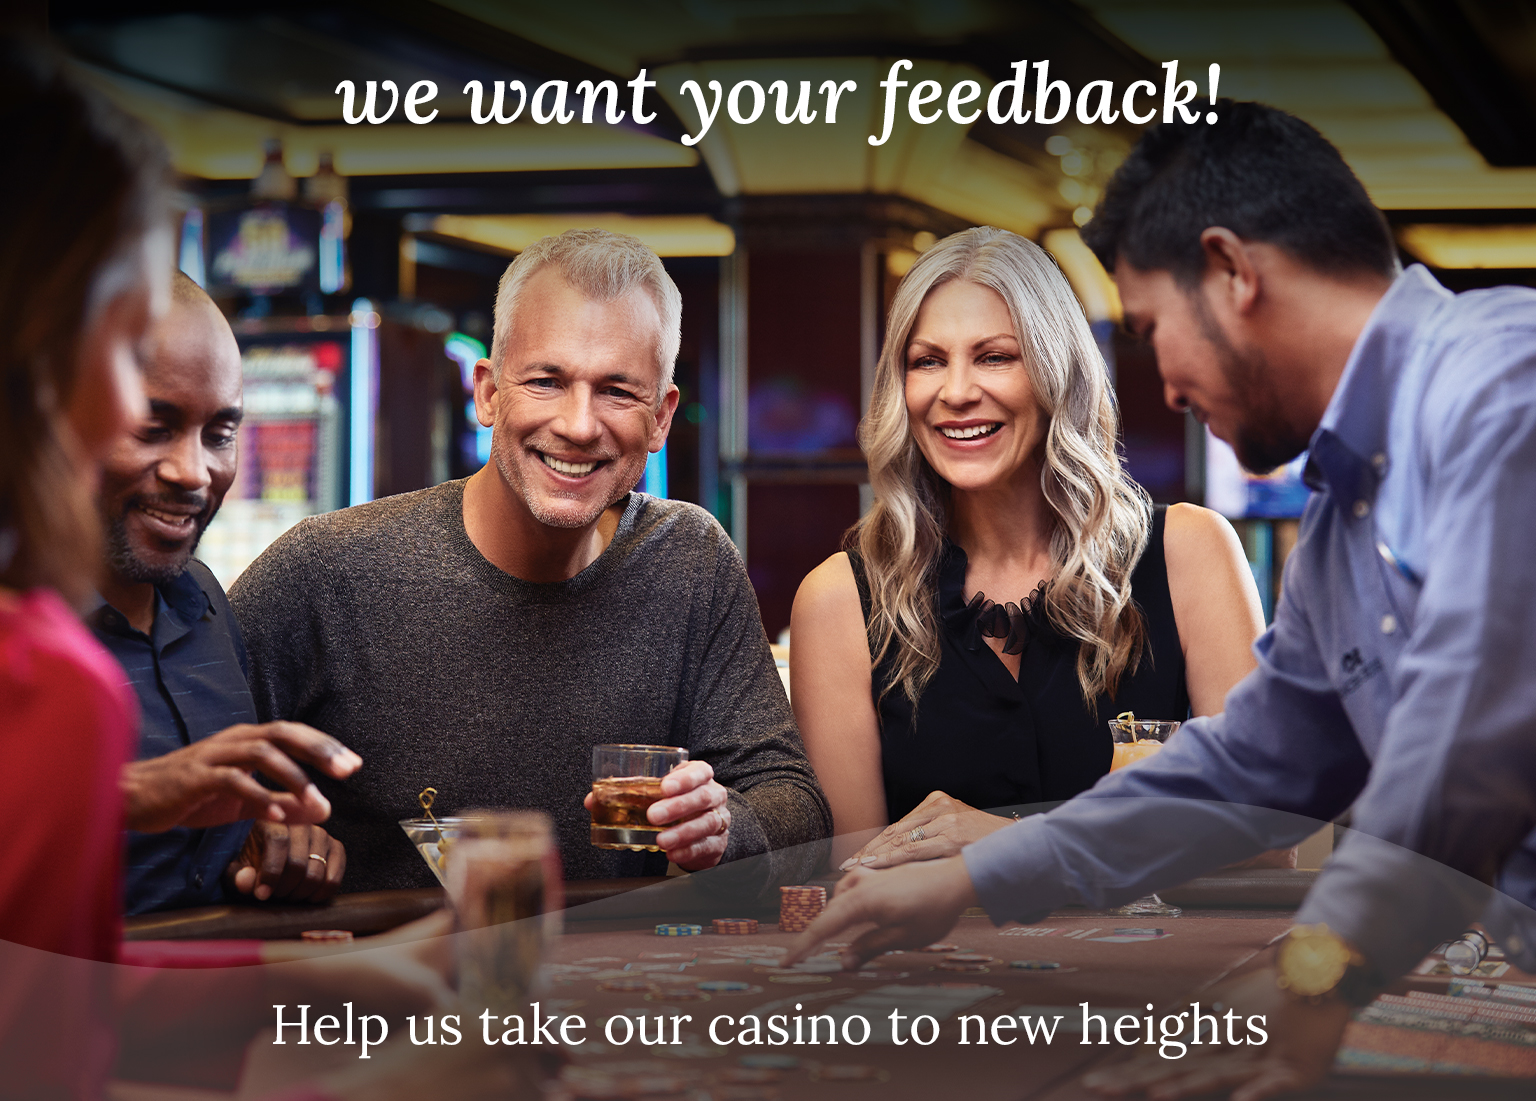 We want your feedback! Help us take our casino to new heights